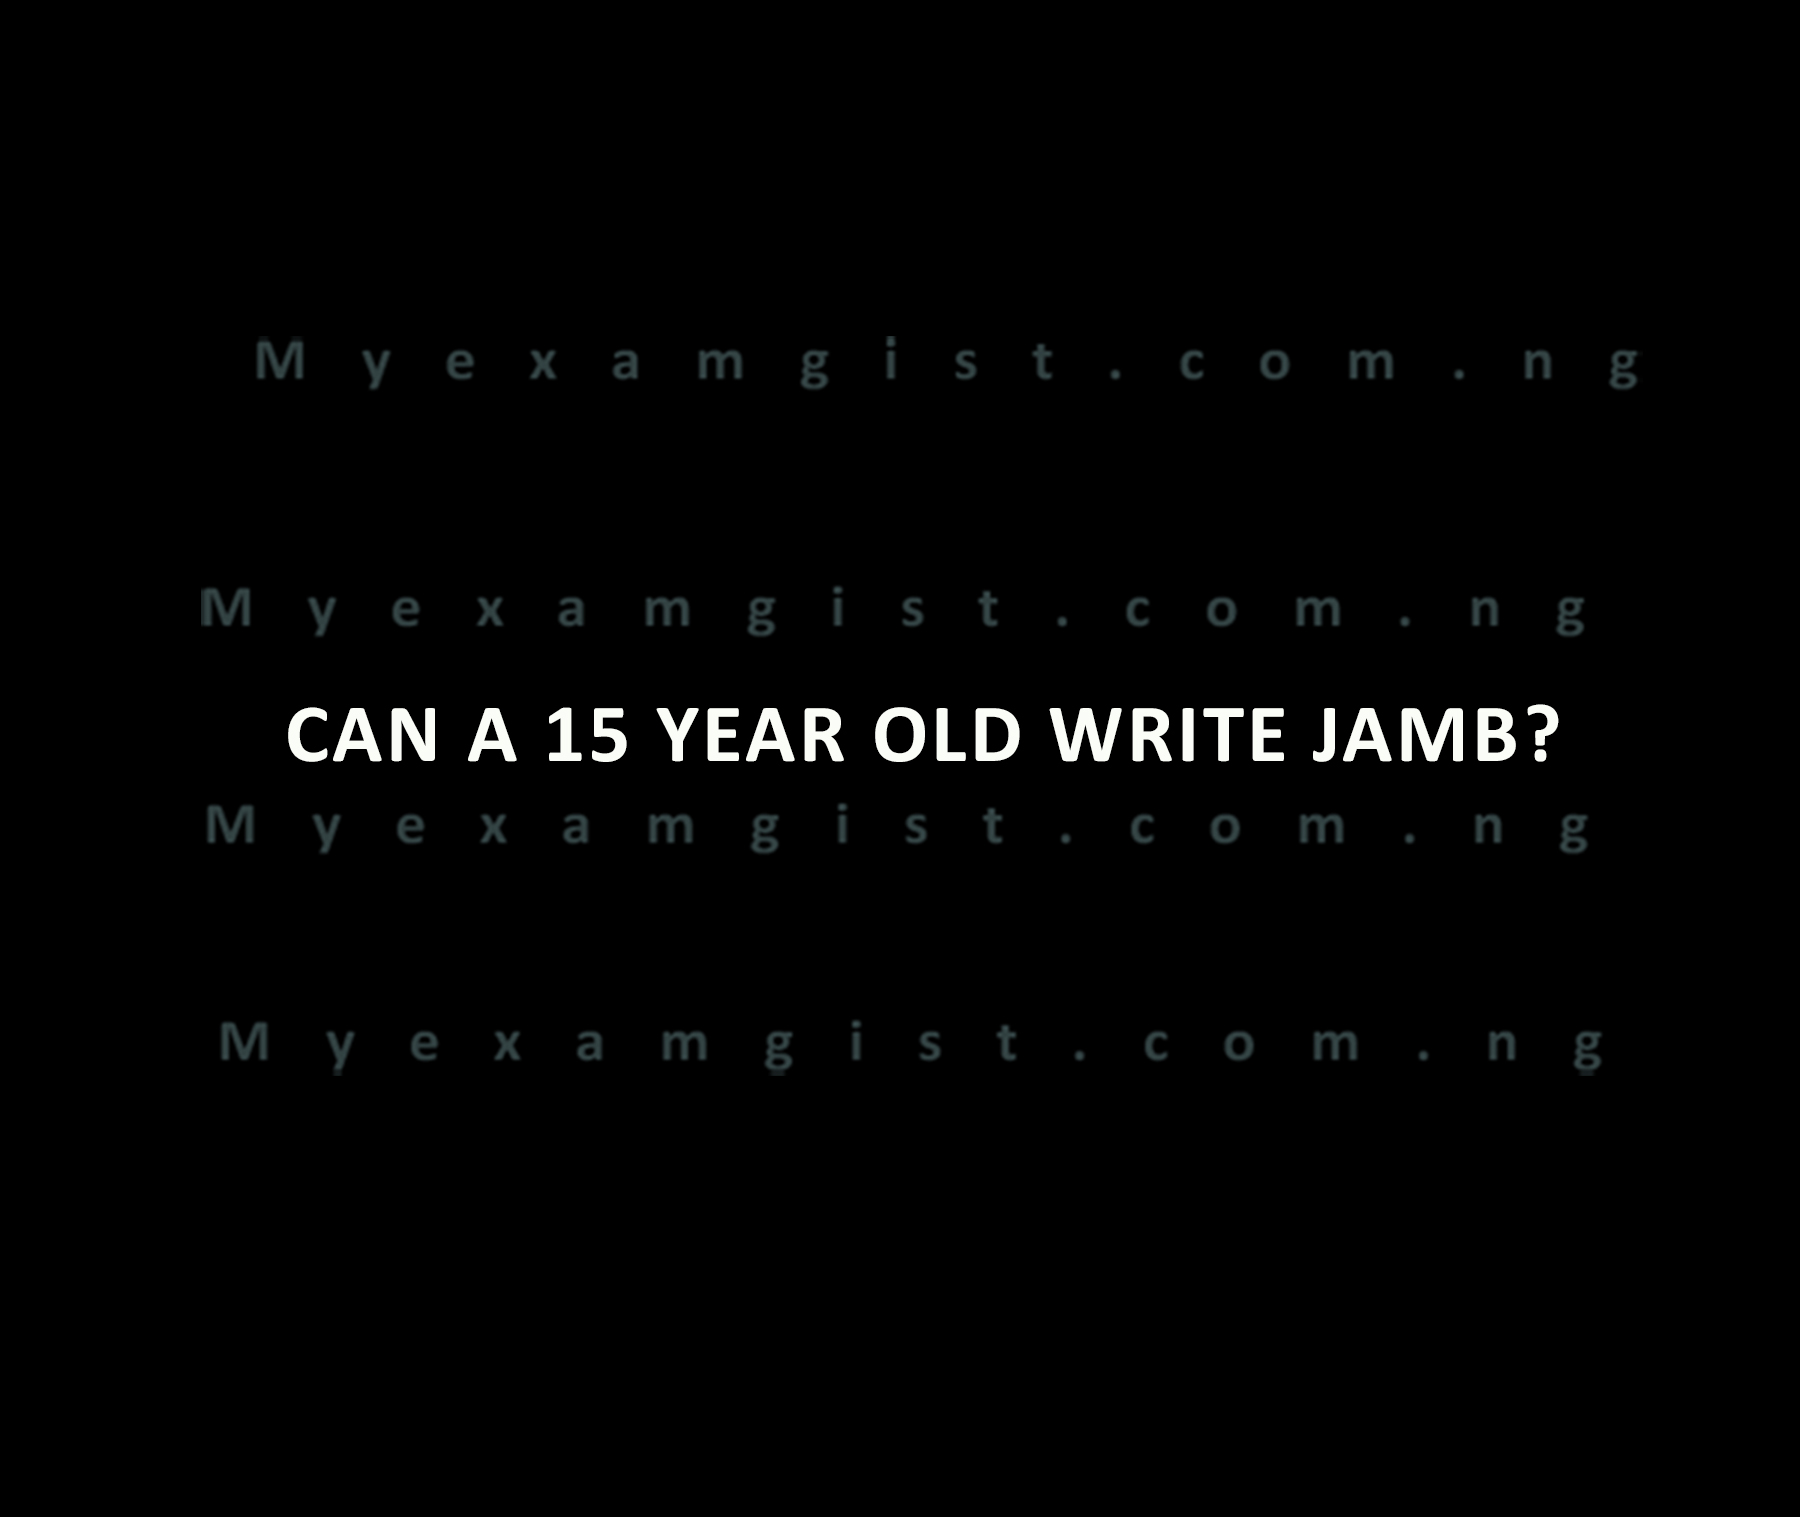 Can a 15 year old write JAMB?